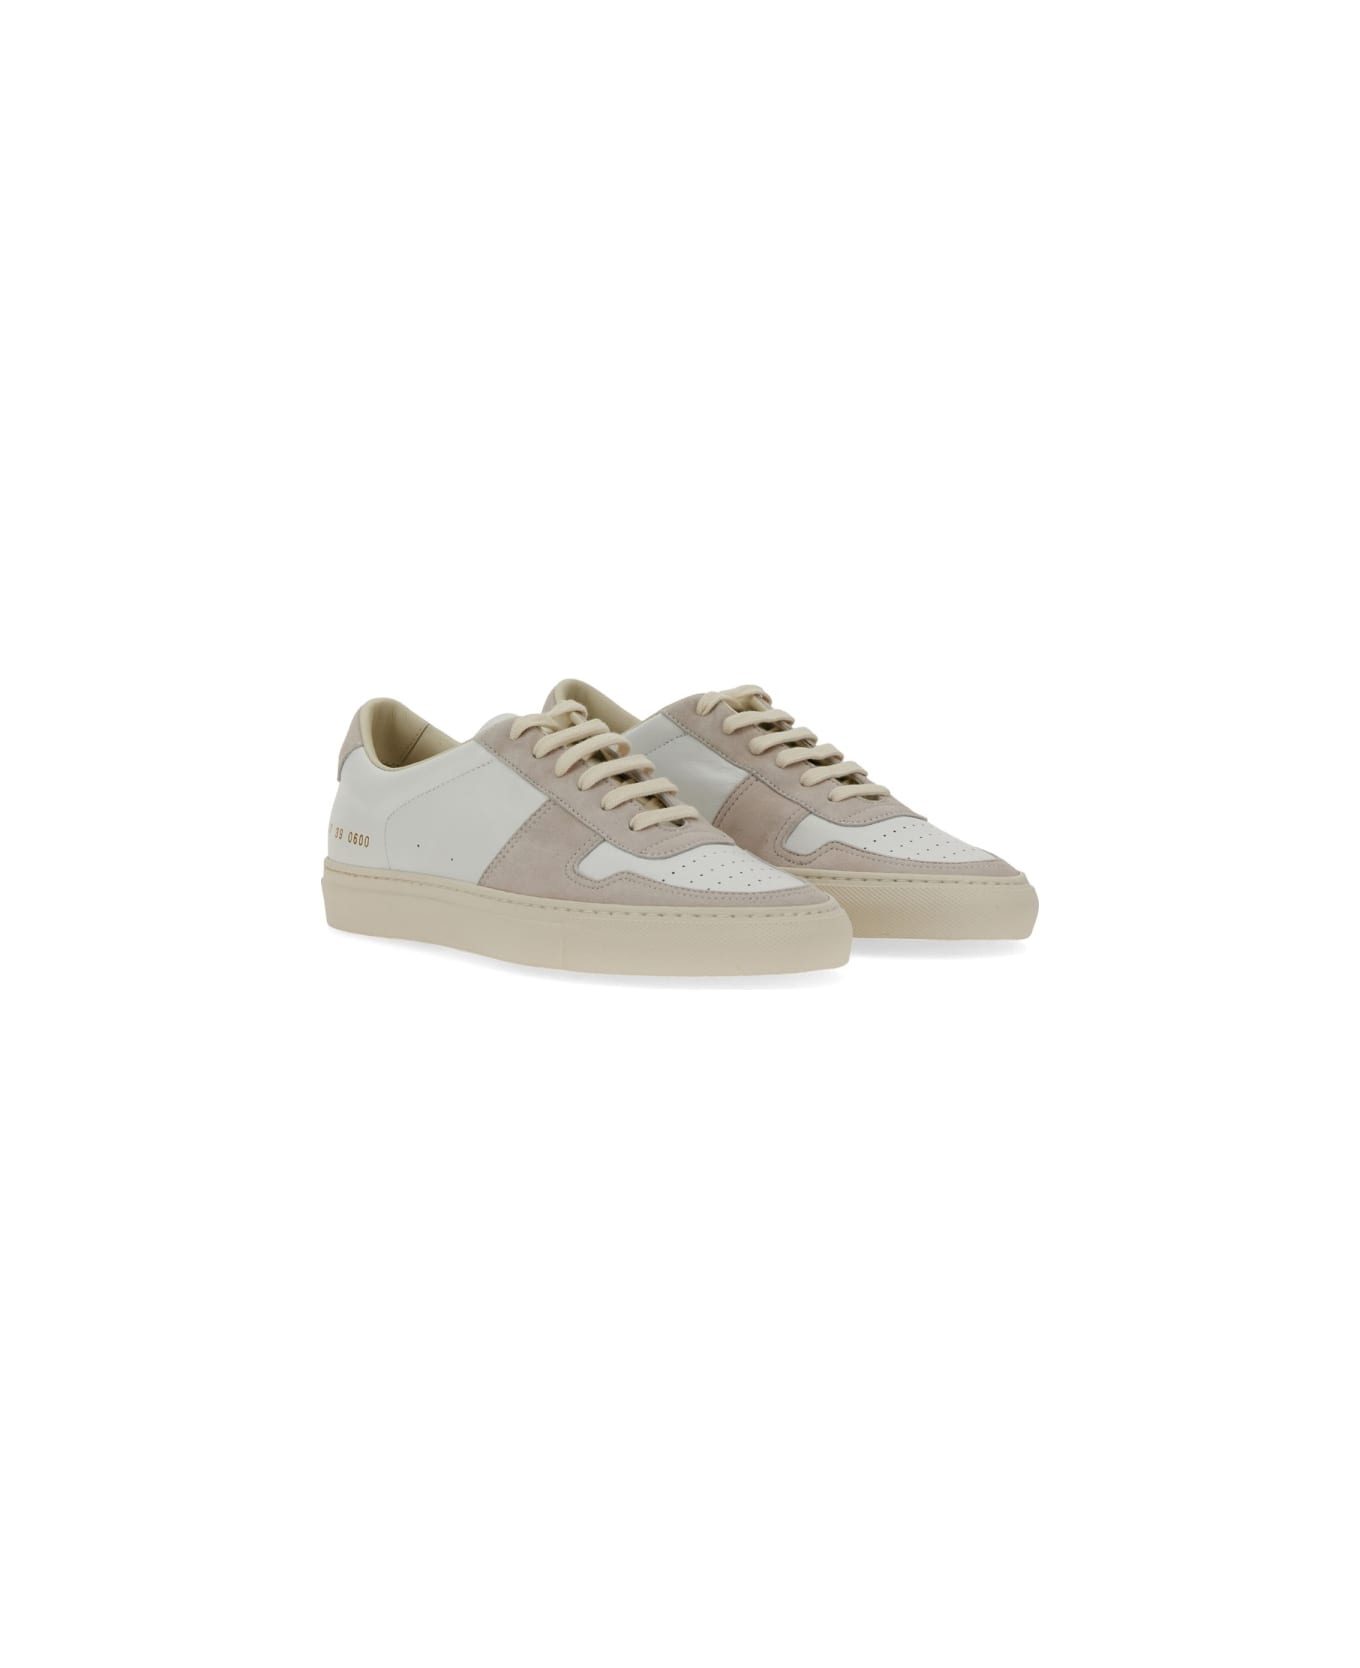 Common Projects 'bball' Sneaker - NUDE スニーカー